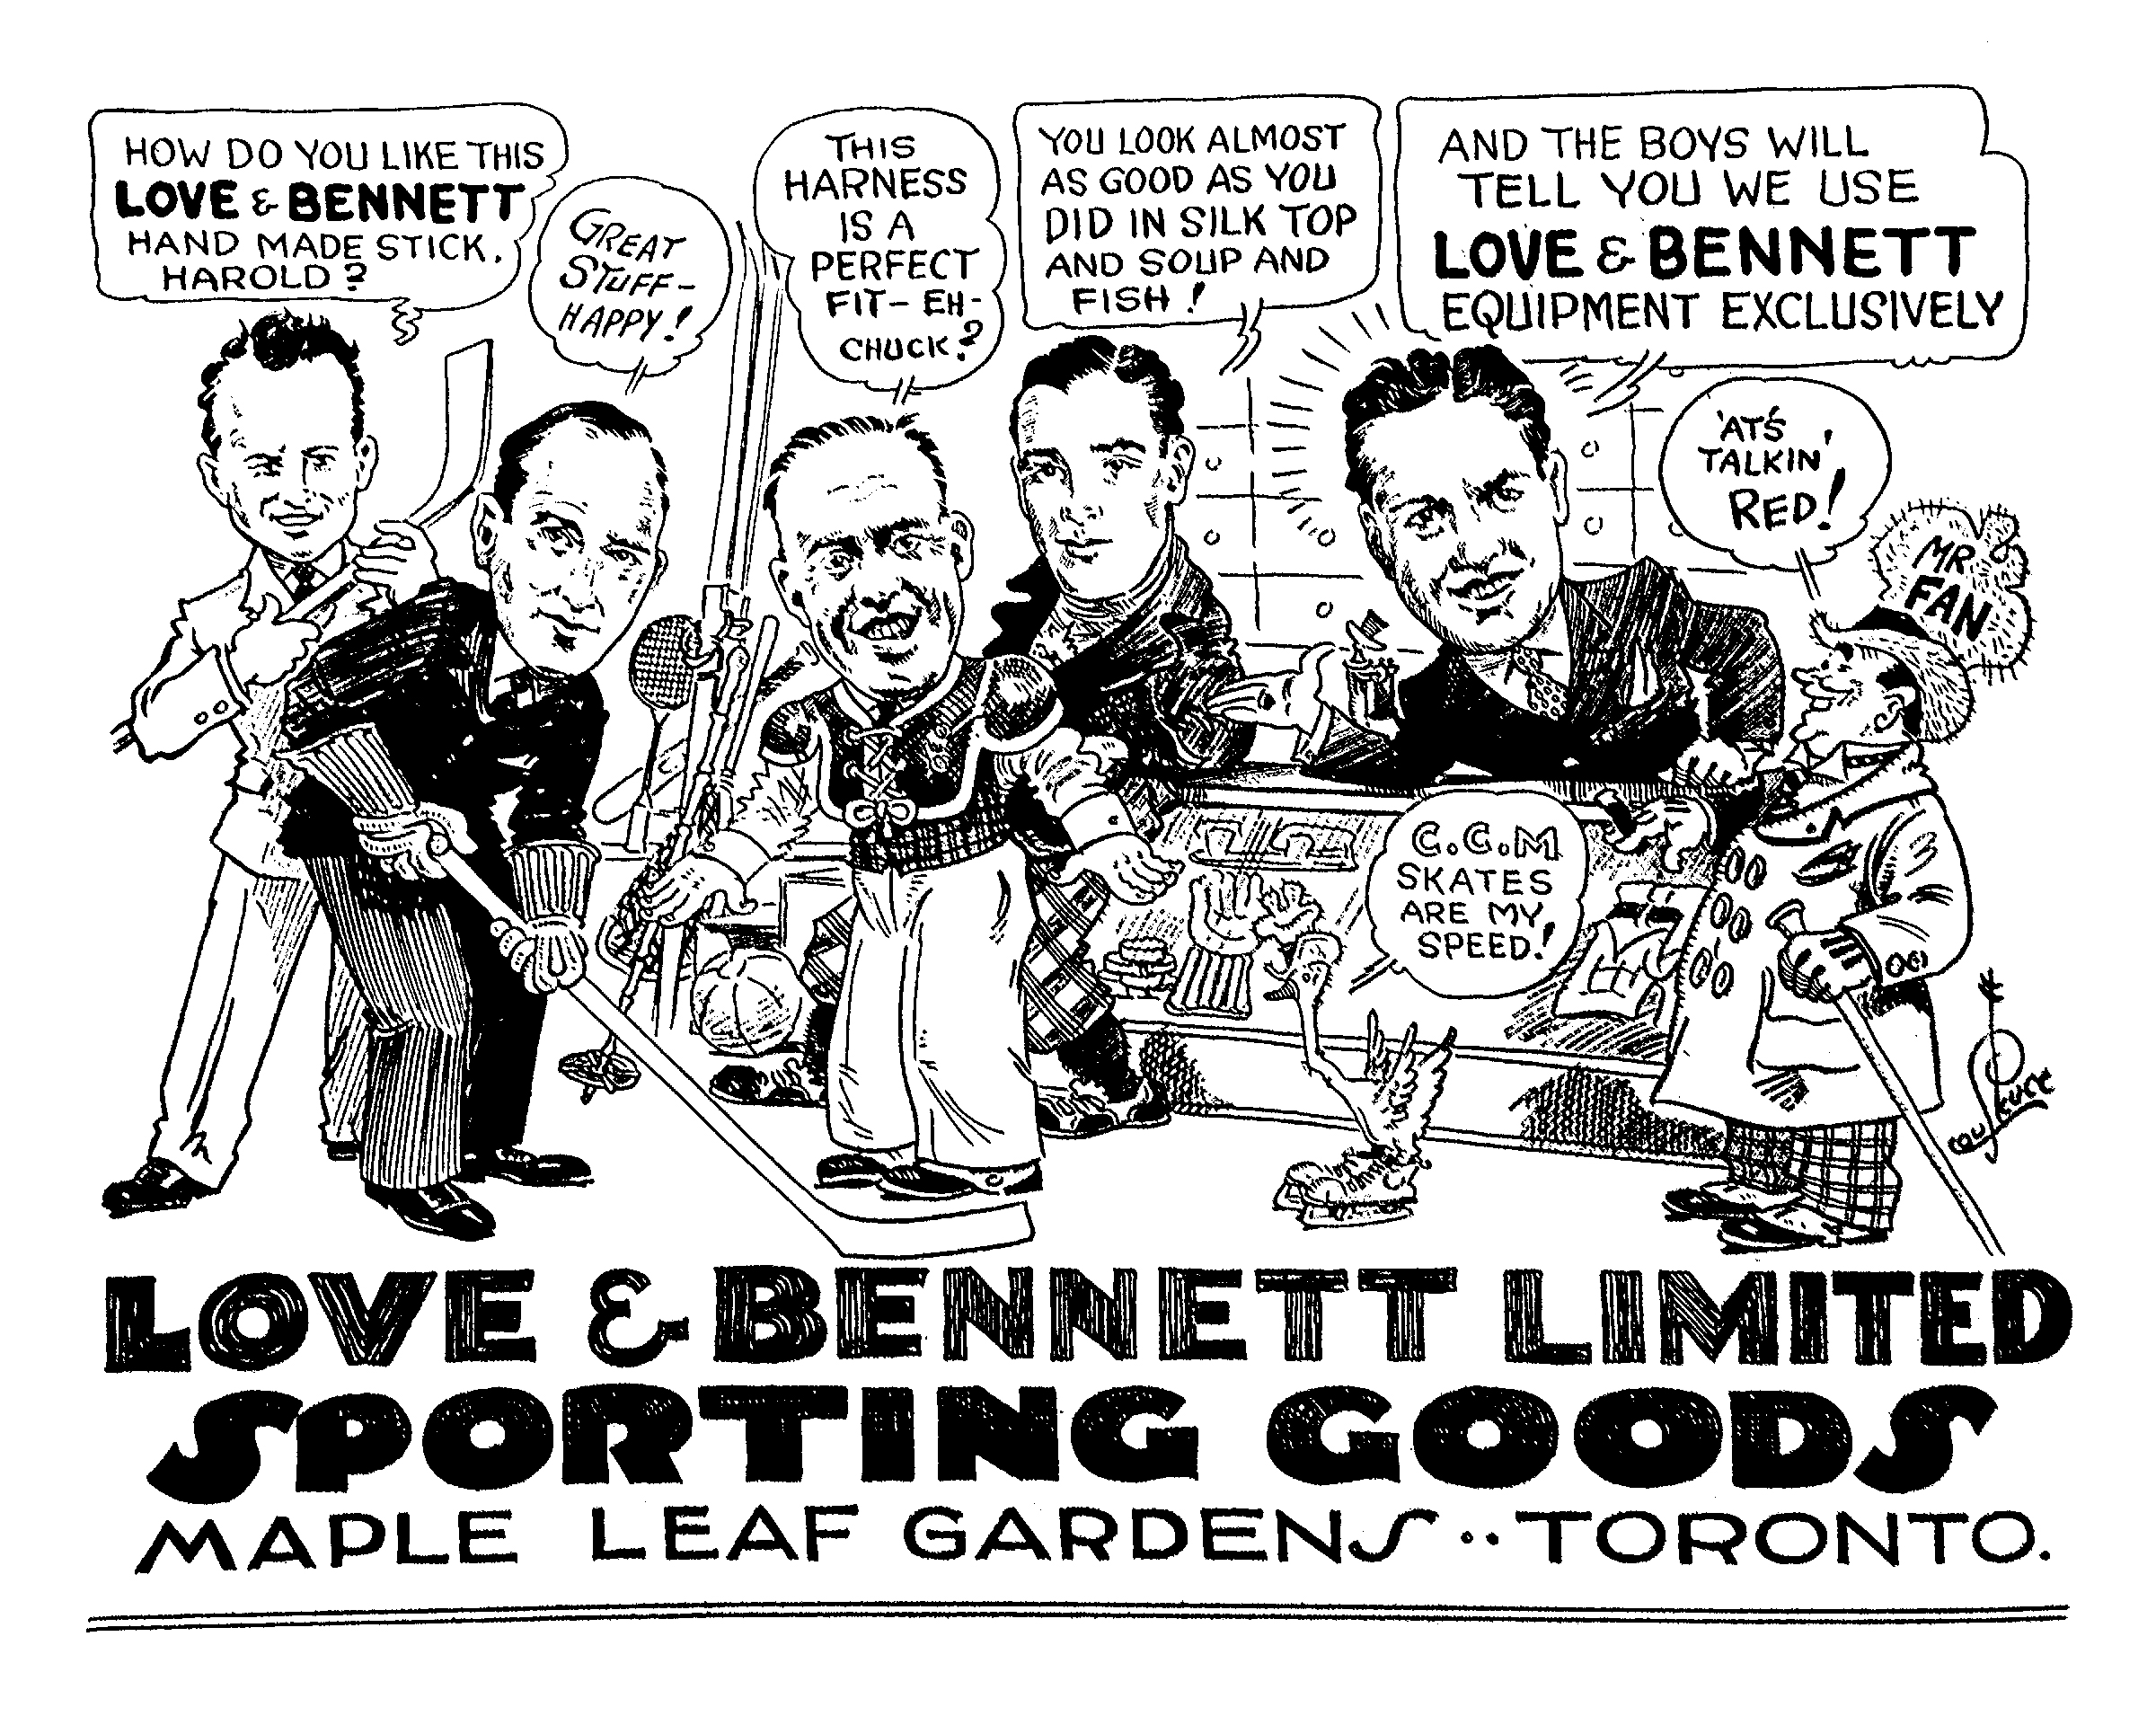 Photo of Love & Bennett ad by Lou Skuce